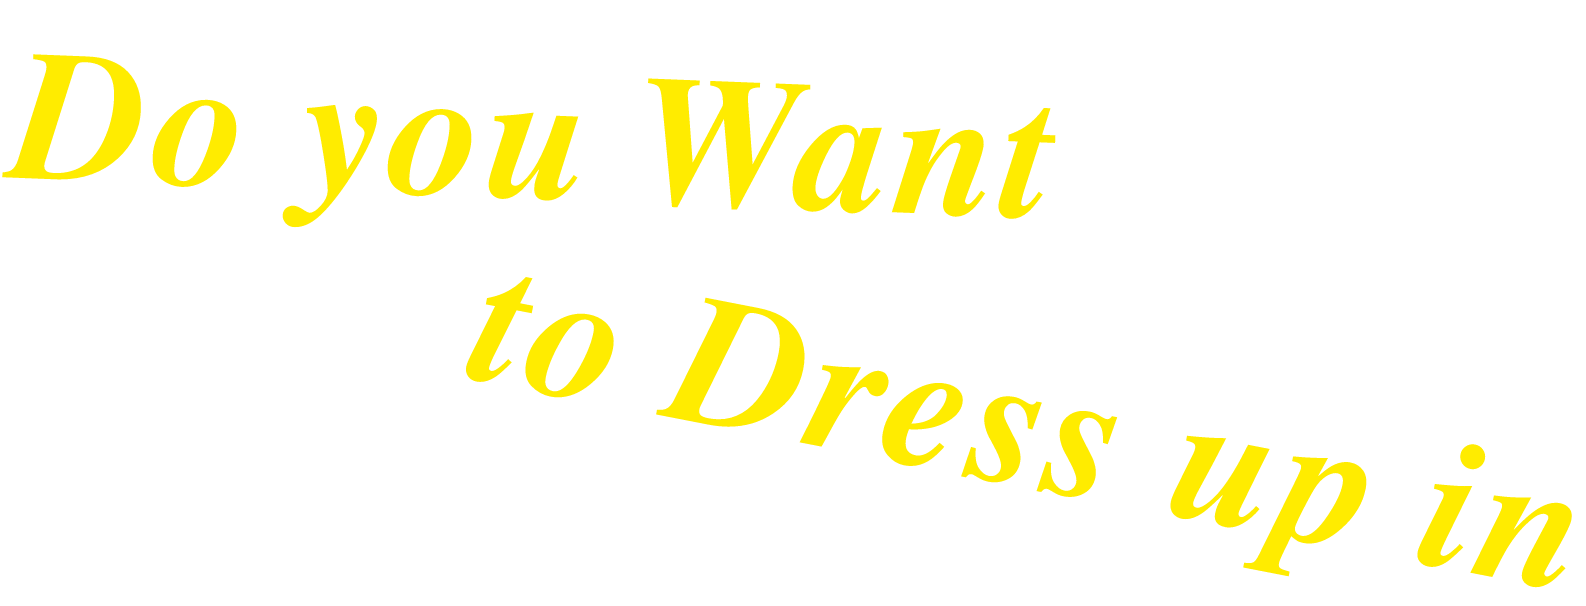 Do you Want to Dress up in